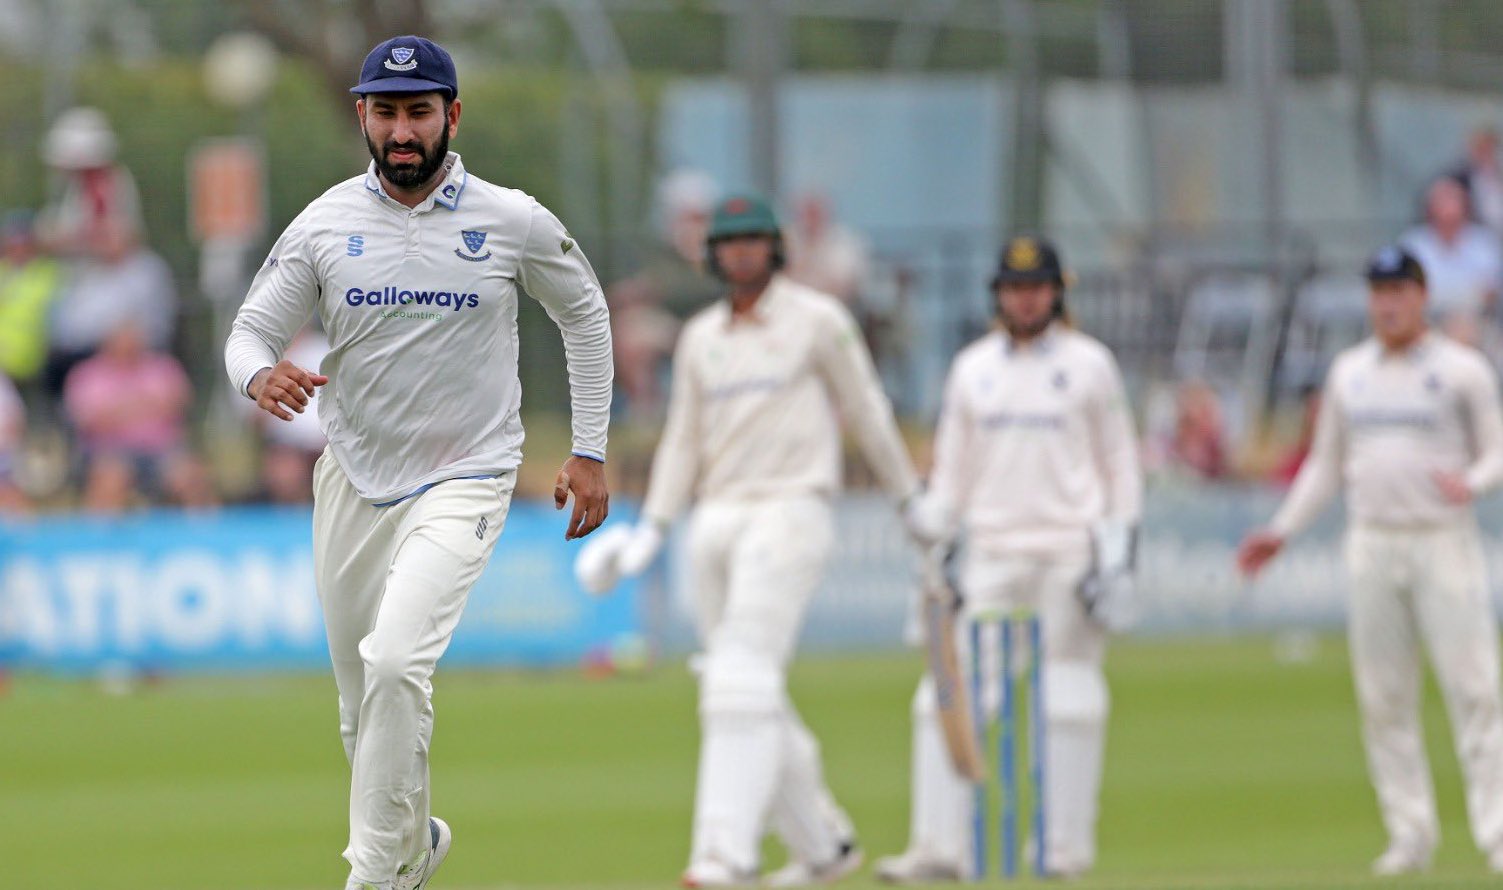 Sussex names Pujara captain ahead of crucial clash against Middlesex